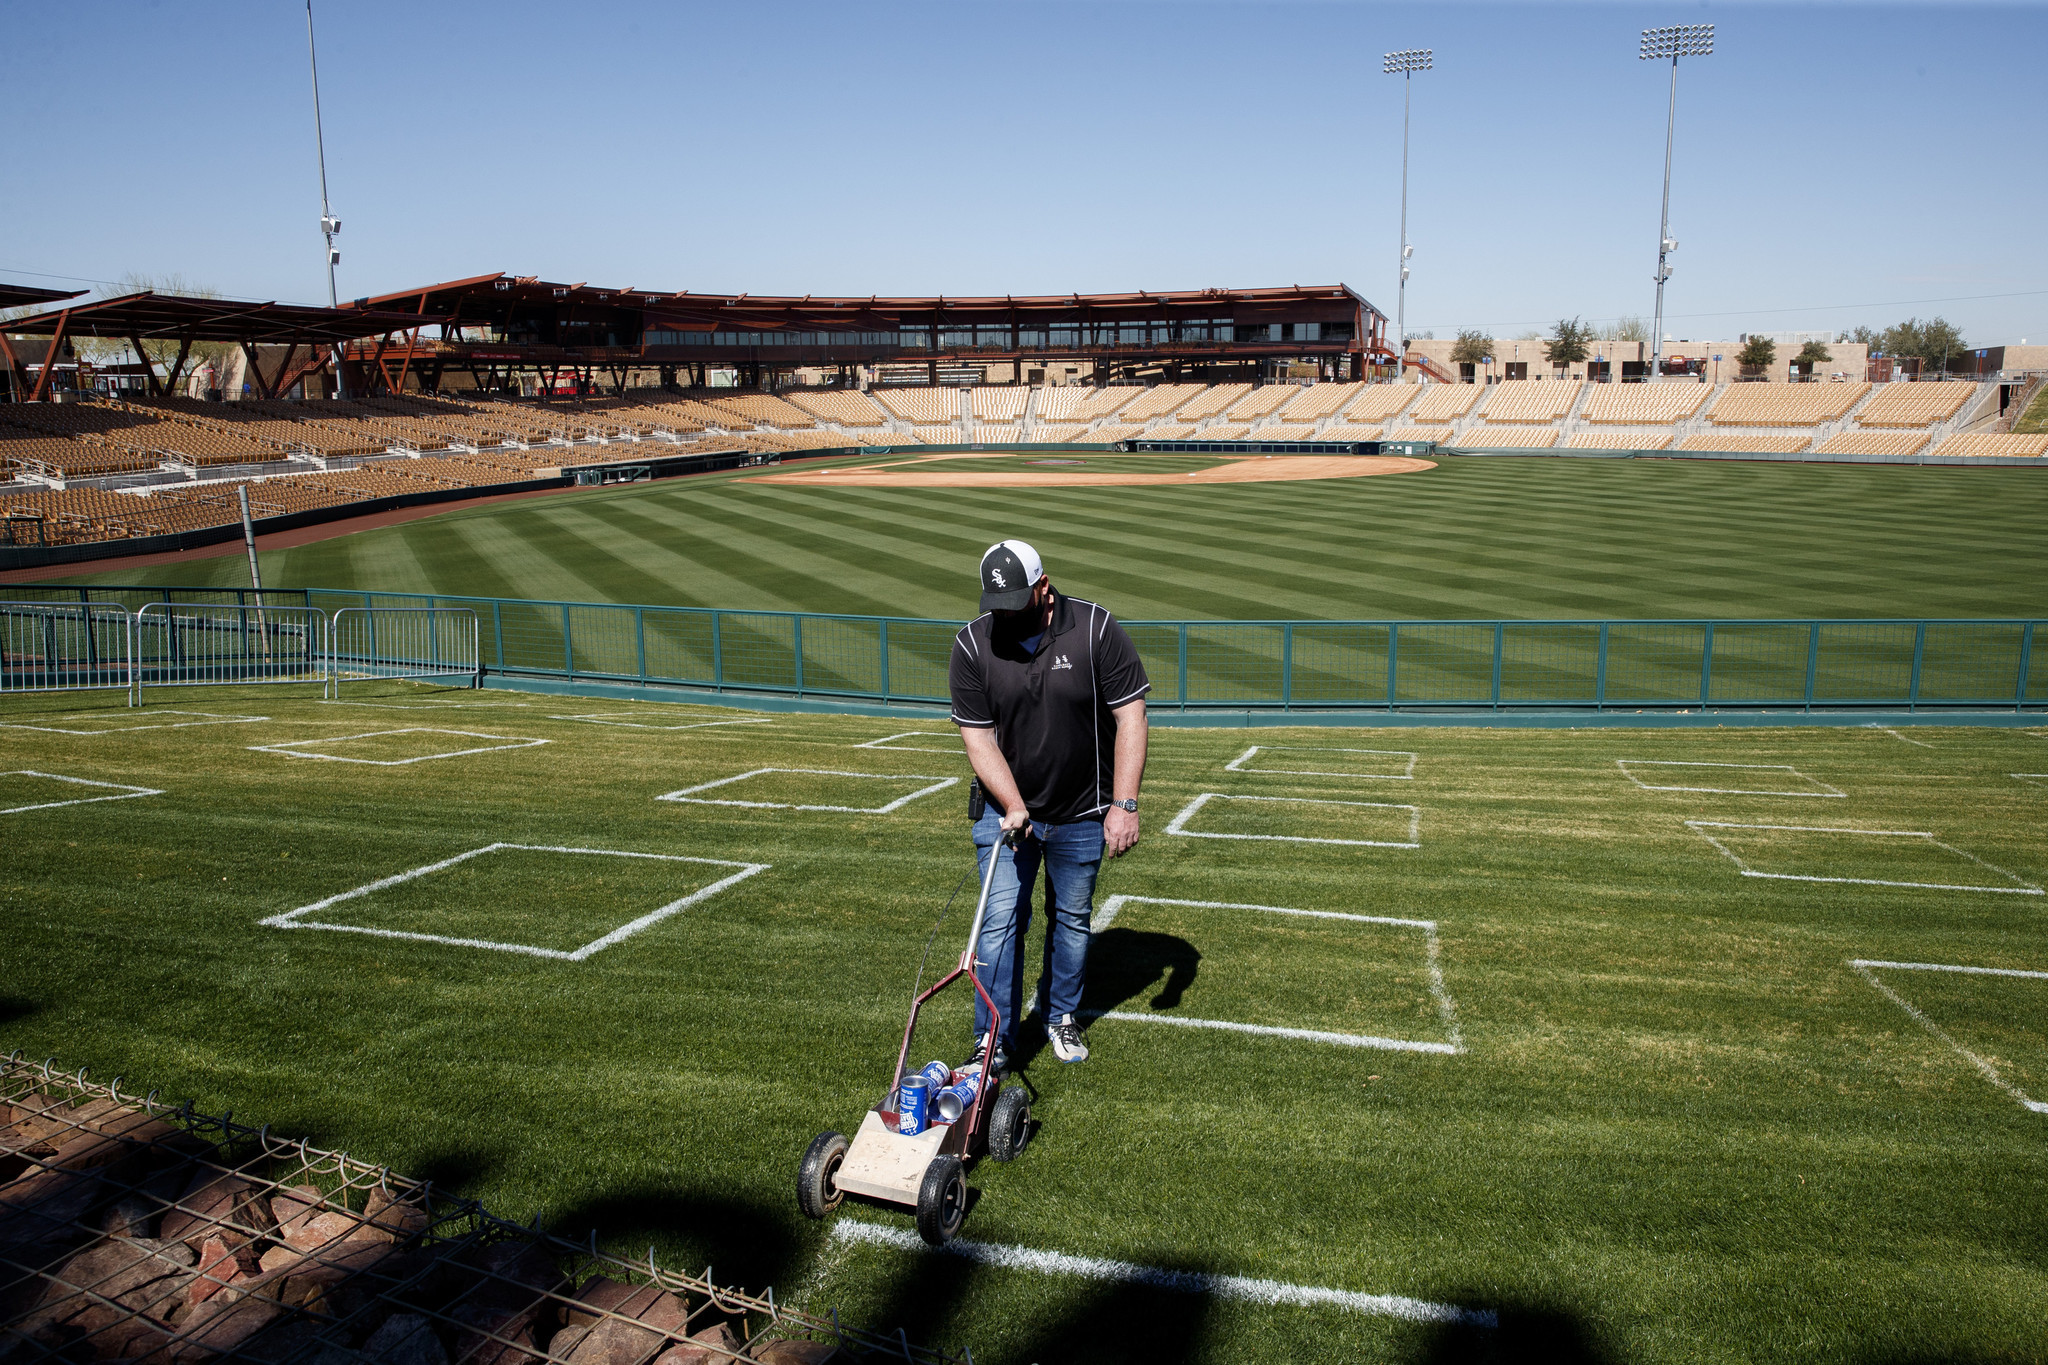 Spring training schedule 2018: Dodgers open at Camelback Ranch Feb